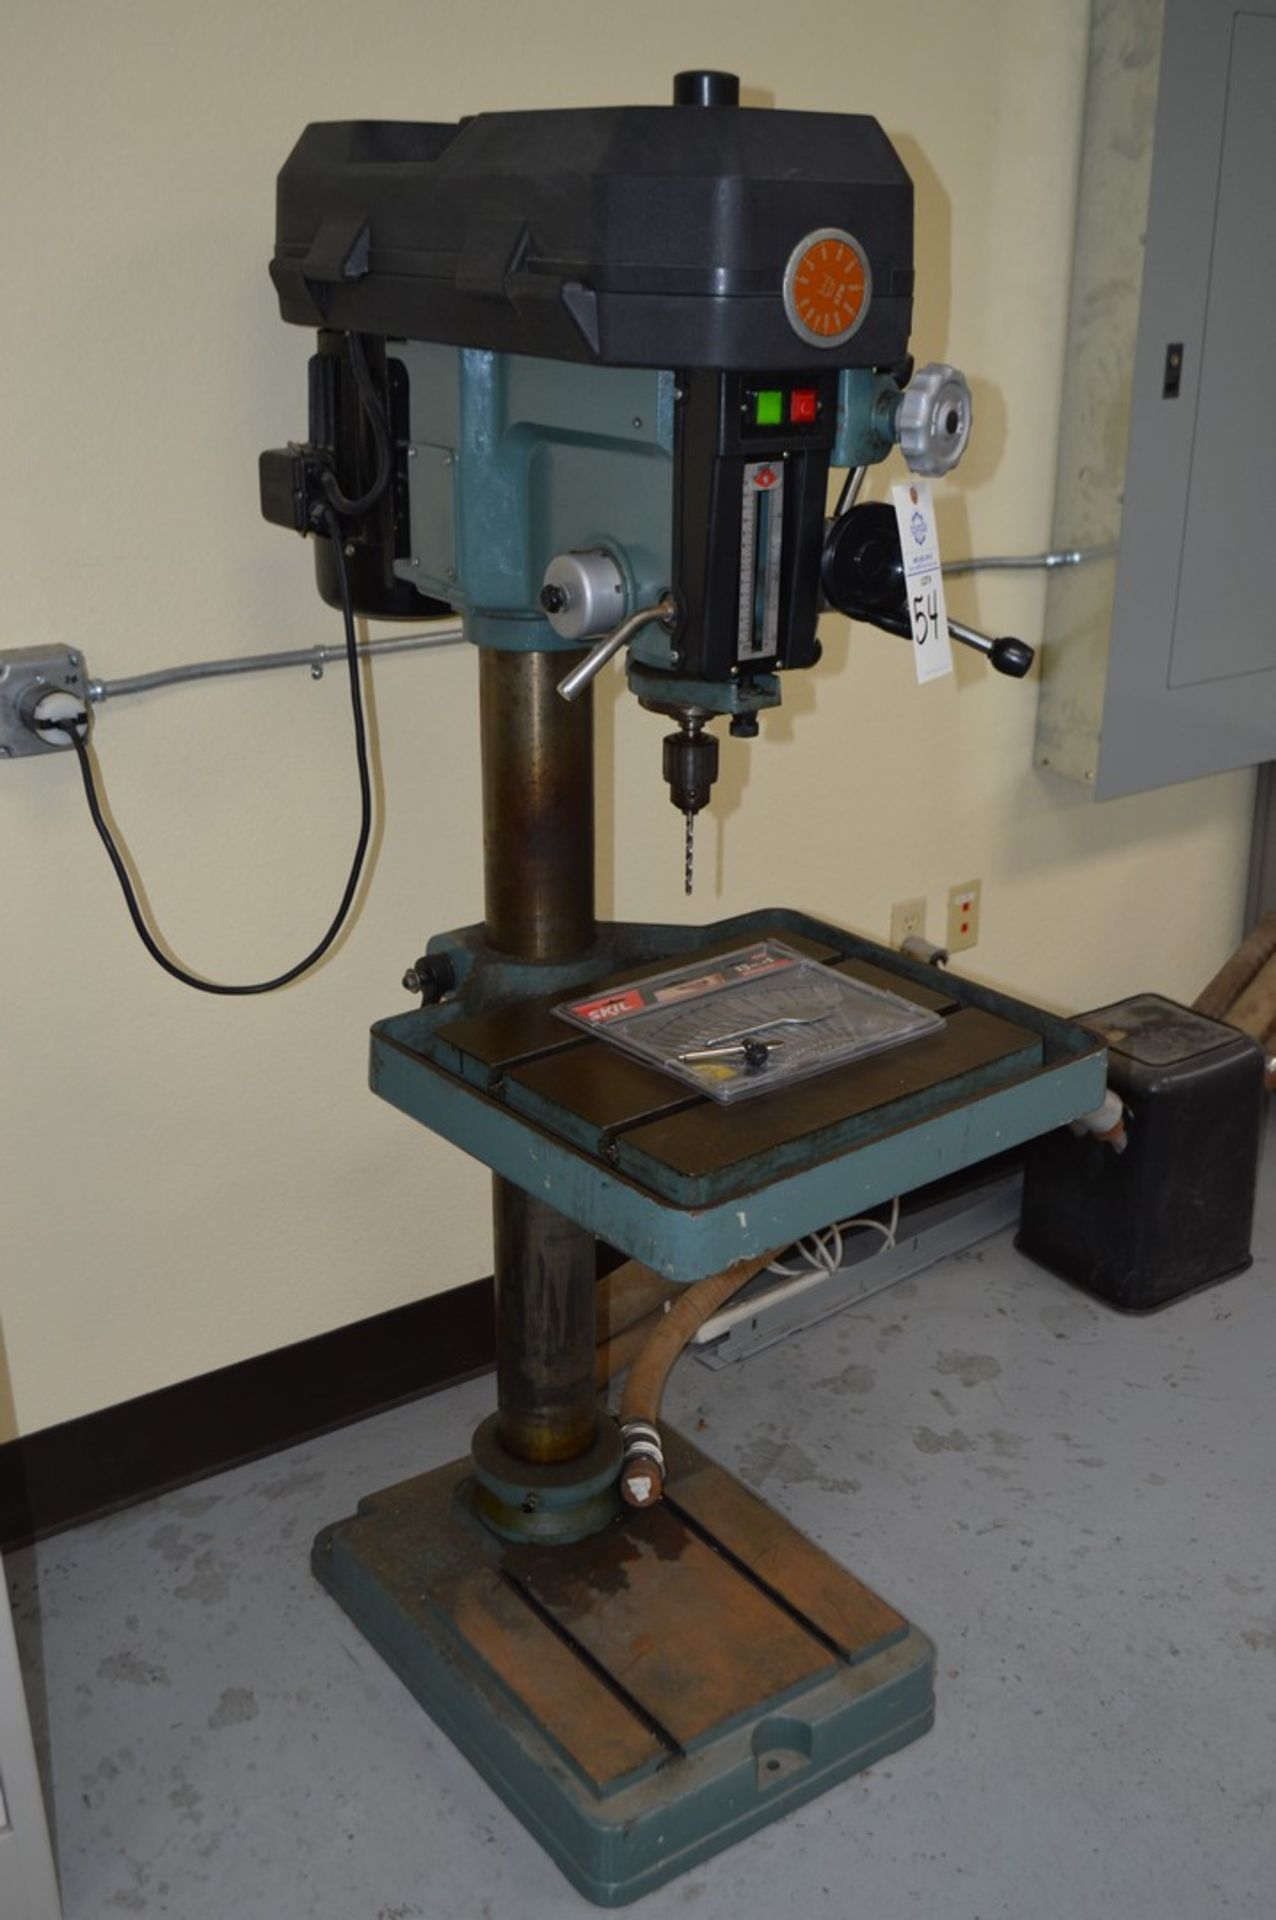 Rong Fu Model FMT-13000D, 1998 drill/mill press with, Skill wood boring spade bit set - Image 2 of 6